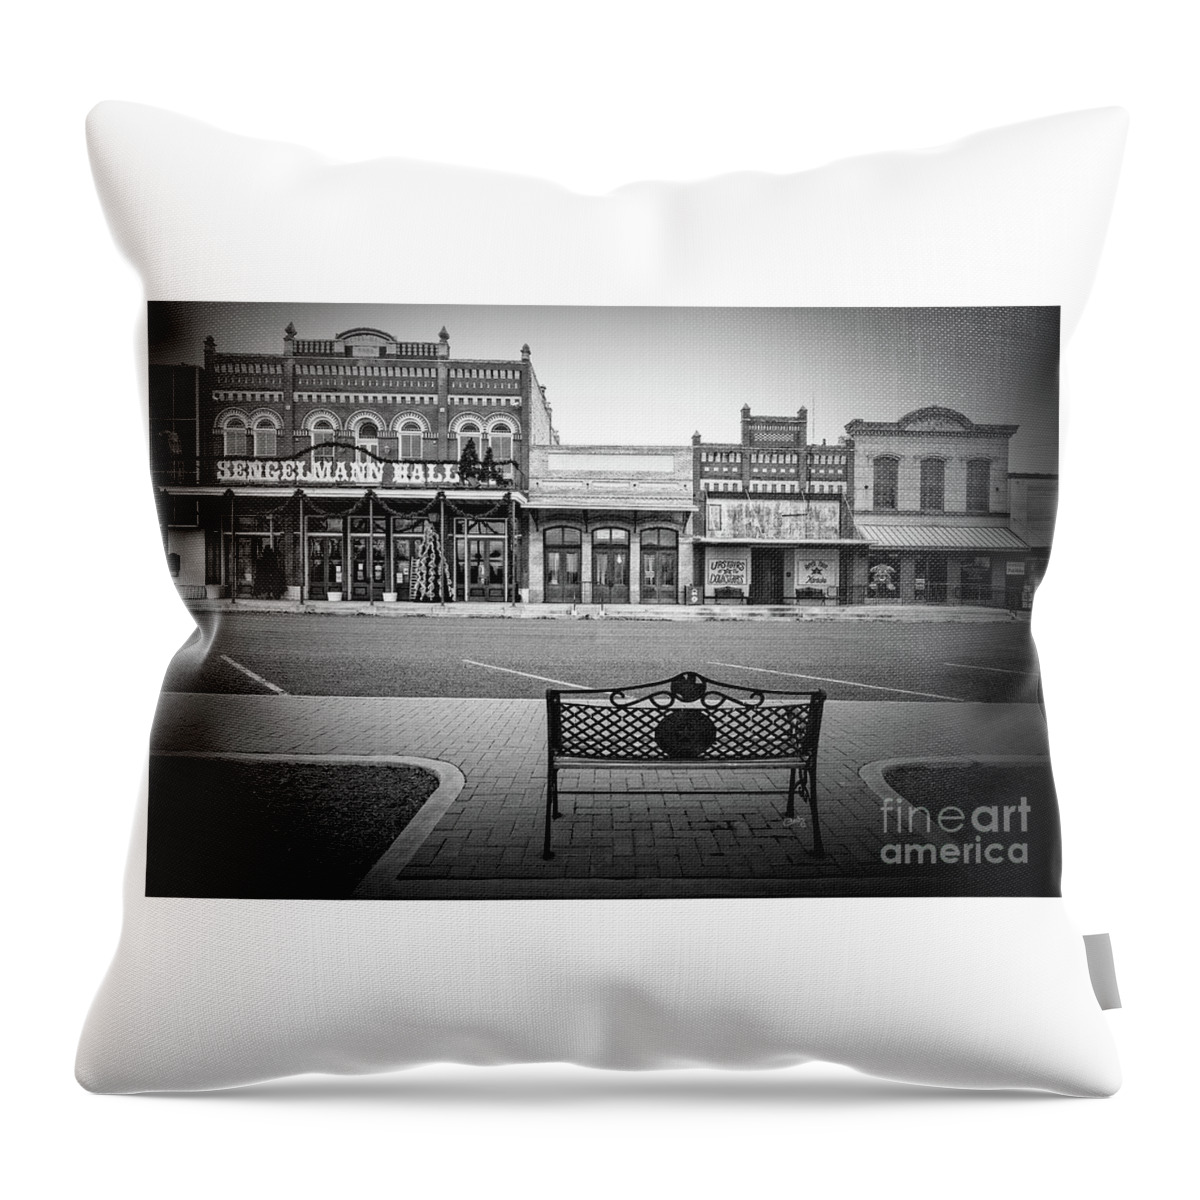 Vintage Street View Throw Pillow featuring the photograph Vintage Street View by Imagery by Charly